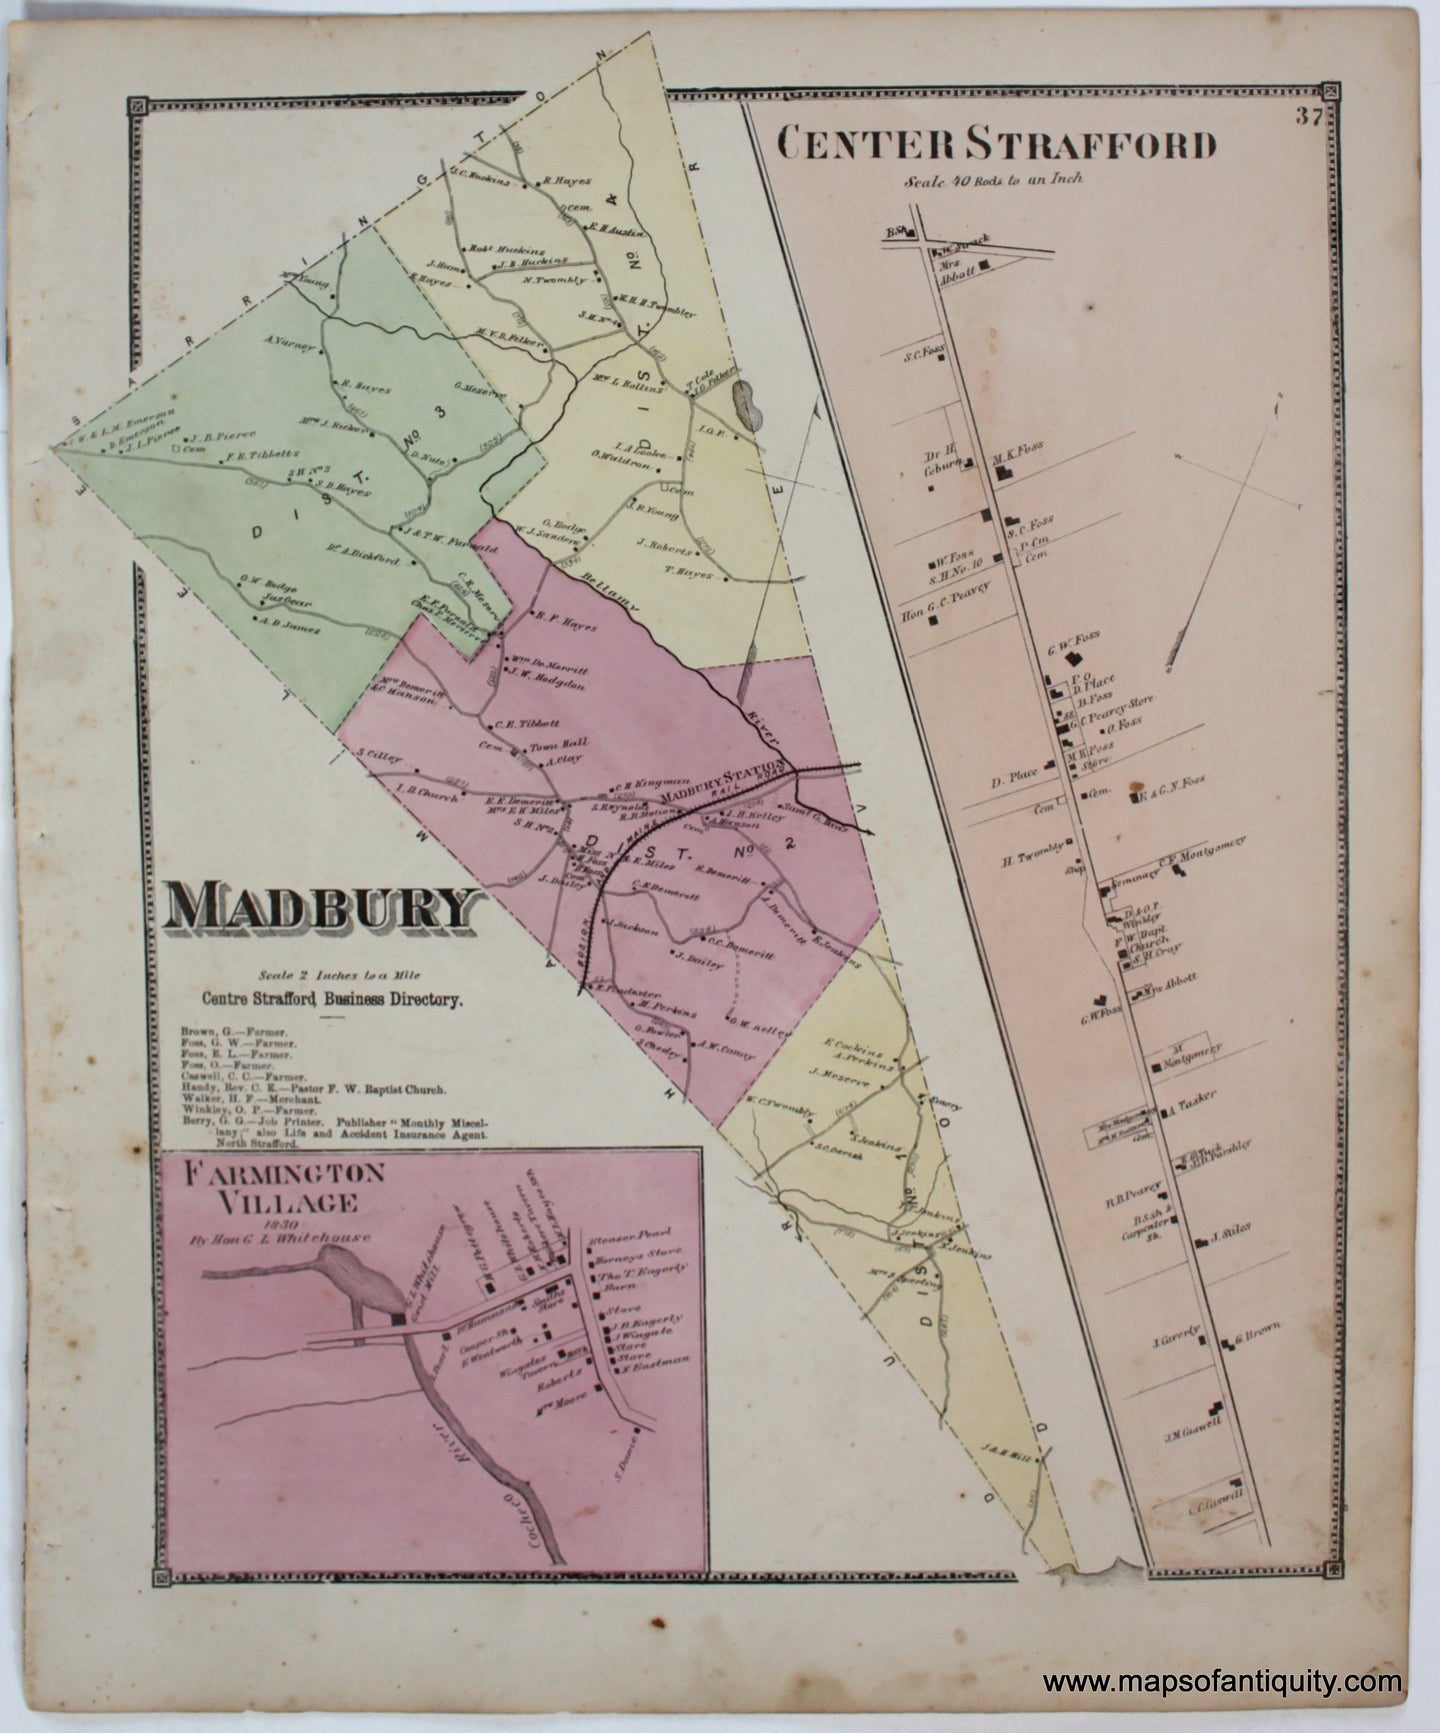 Antique-Map-Madbury-Center-Strafford-Farmington-Village-Strafford-County-Town-Towns-New-Hampshire-NH-Sanford-Everts-1871-1870s-1800s-Mid-Late-19th-Century-Maps-of-Antiquity